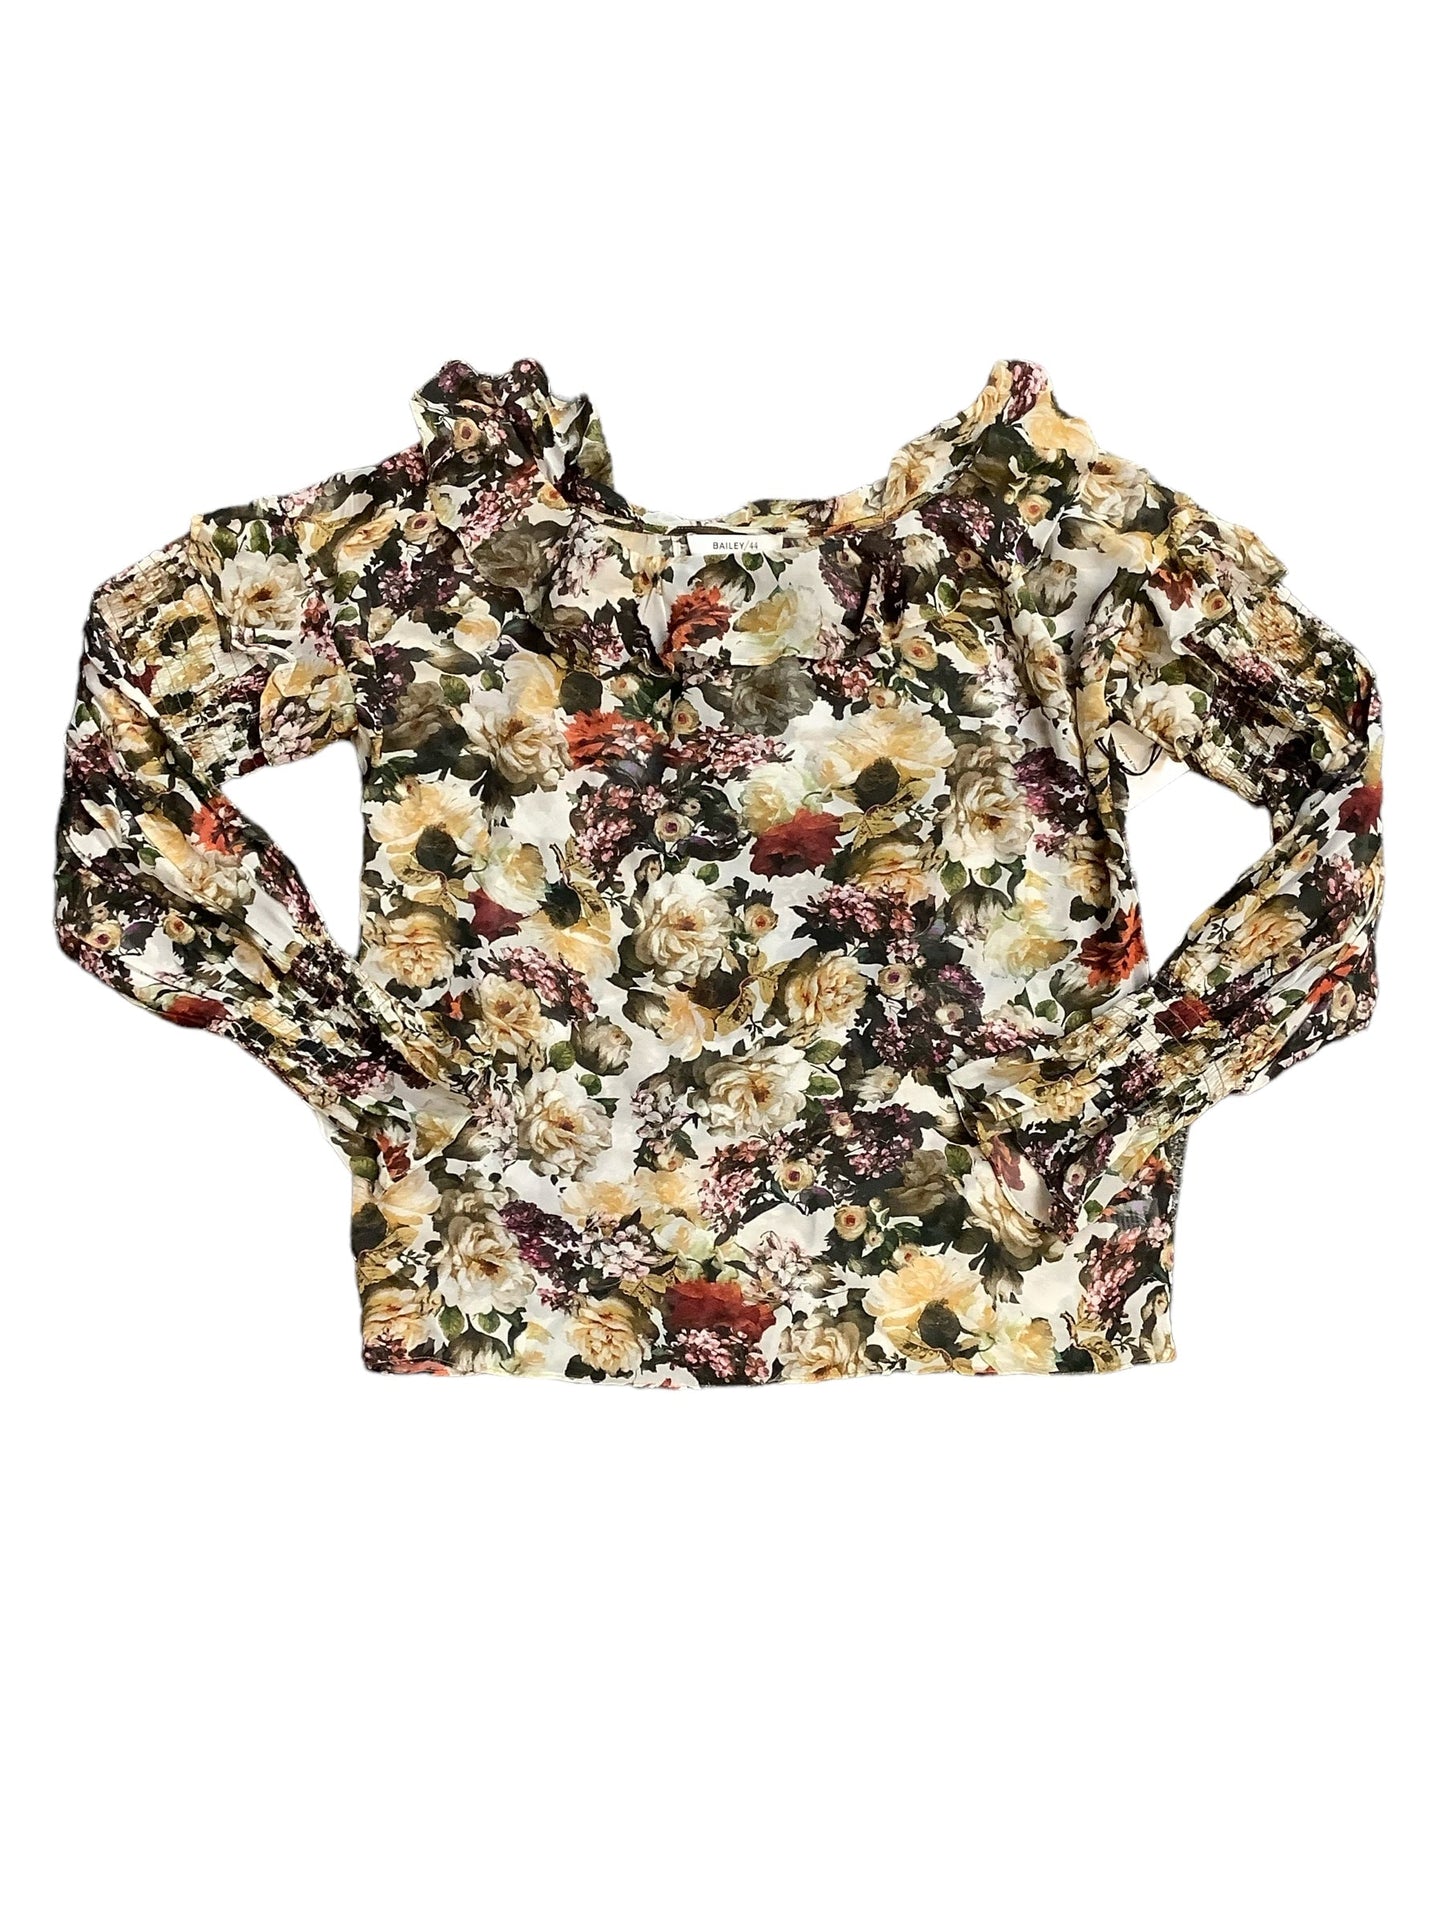 Floral Print Top Long Sleeve Bailey 44, Size M